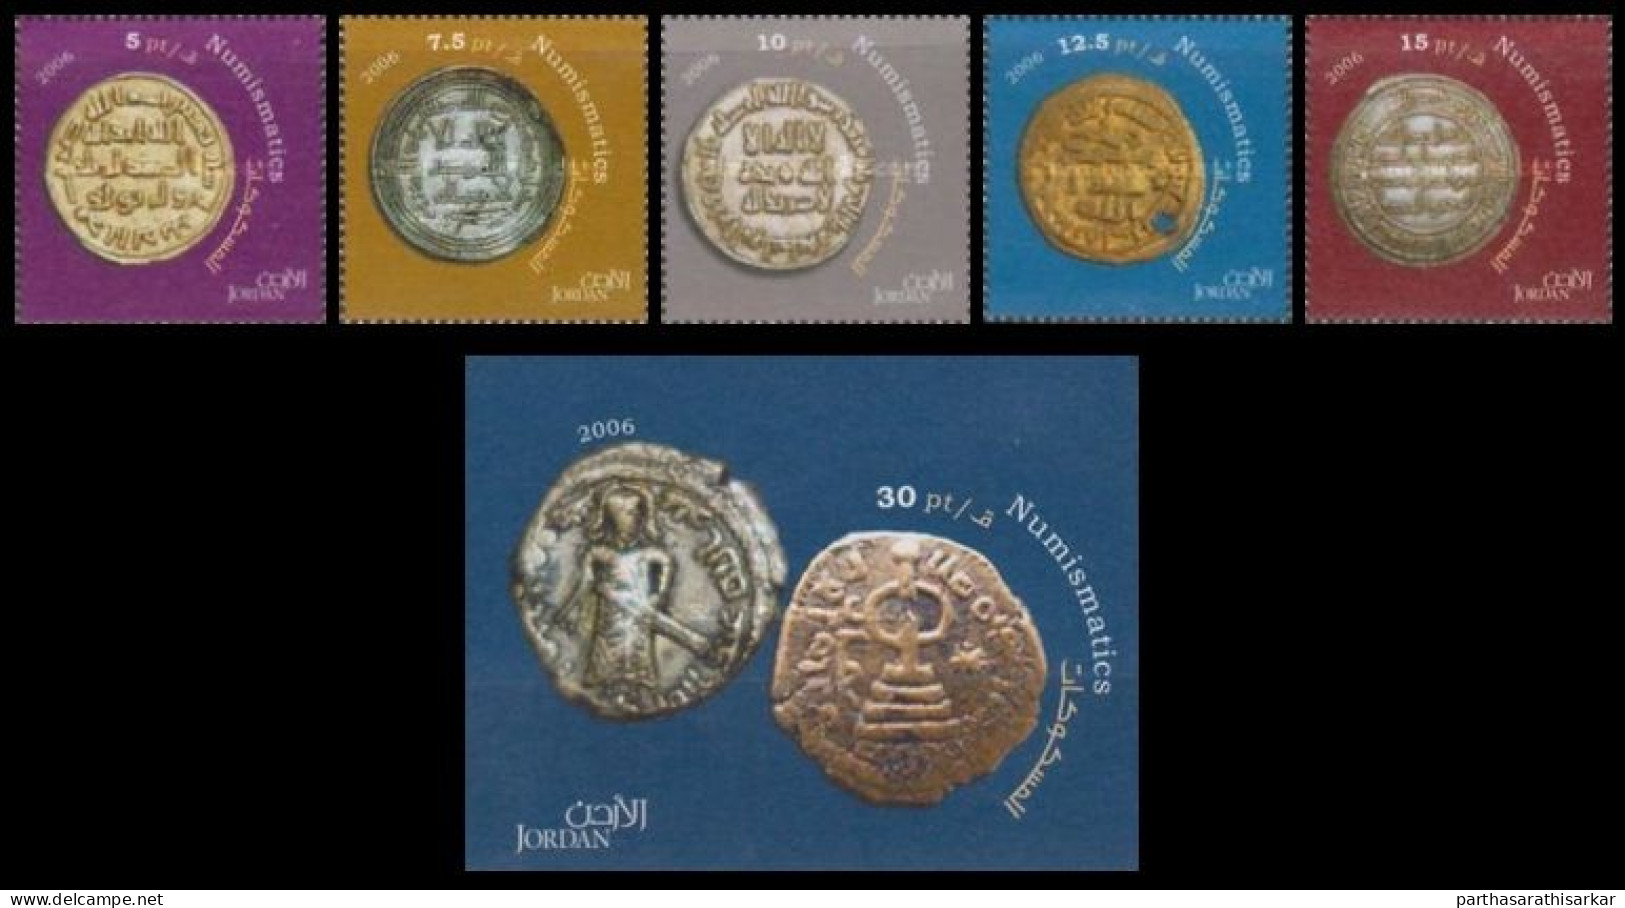 JORDAN 2006 ANCIENT COINS COMPLETE SET WITH MINIATURE SHEET MS MNH - Coins